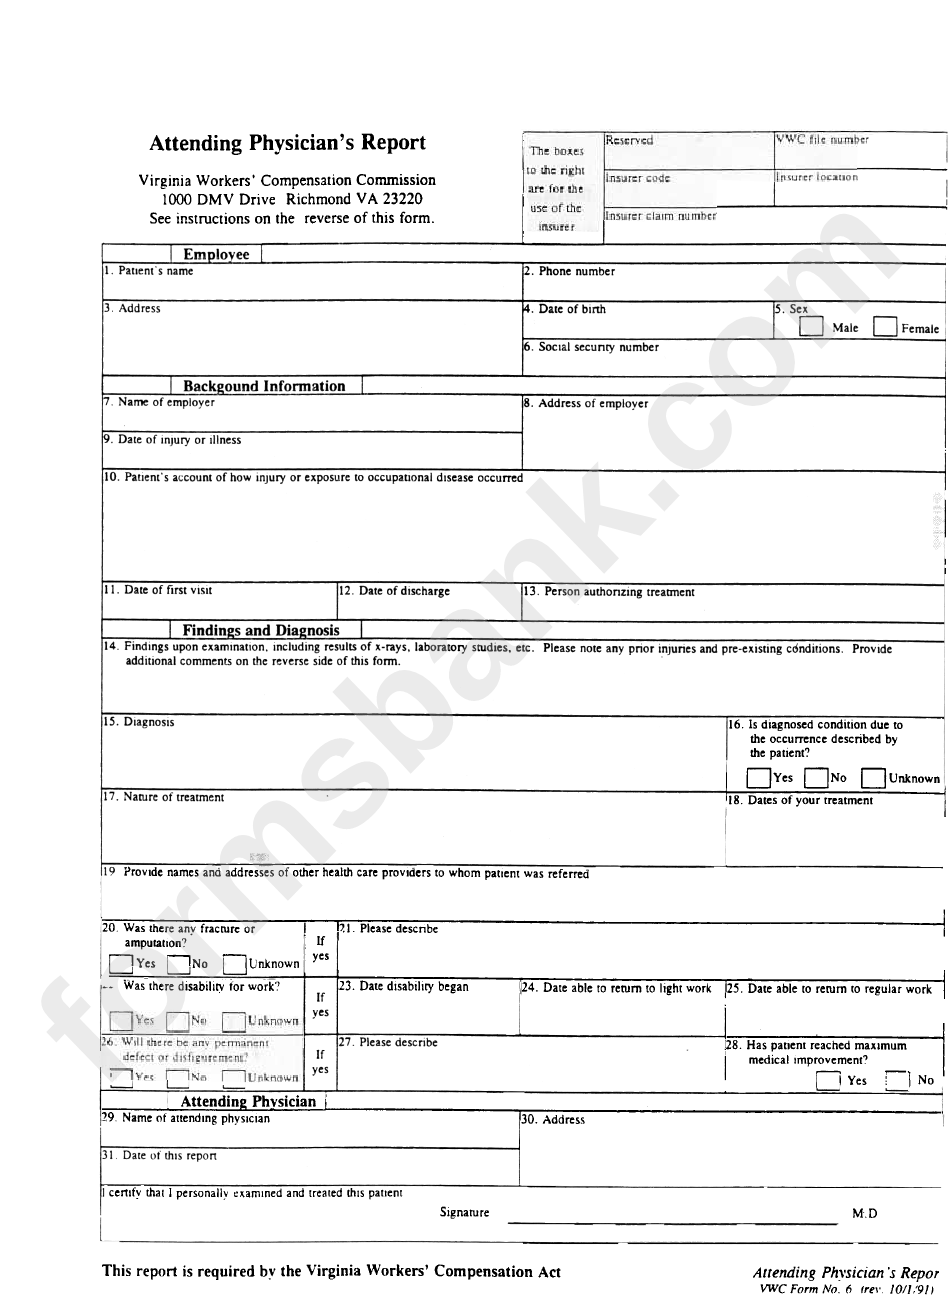 fillable-form-6-attending-physician-s-report-printable-pdf-download